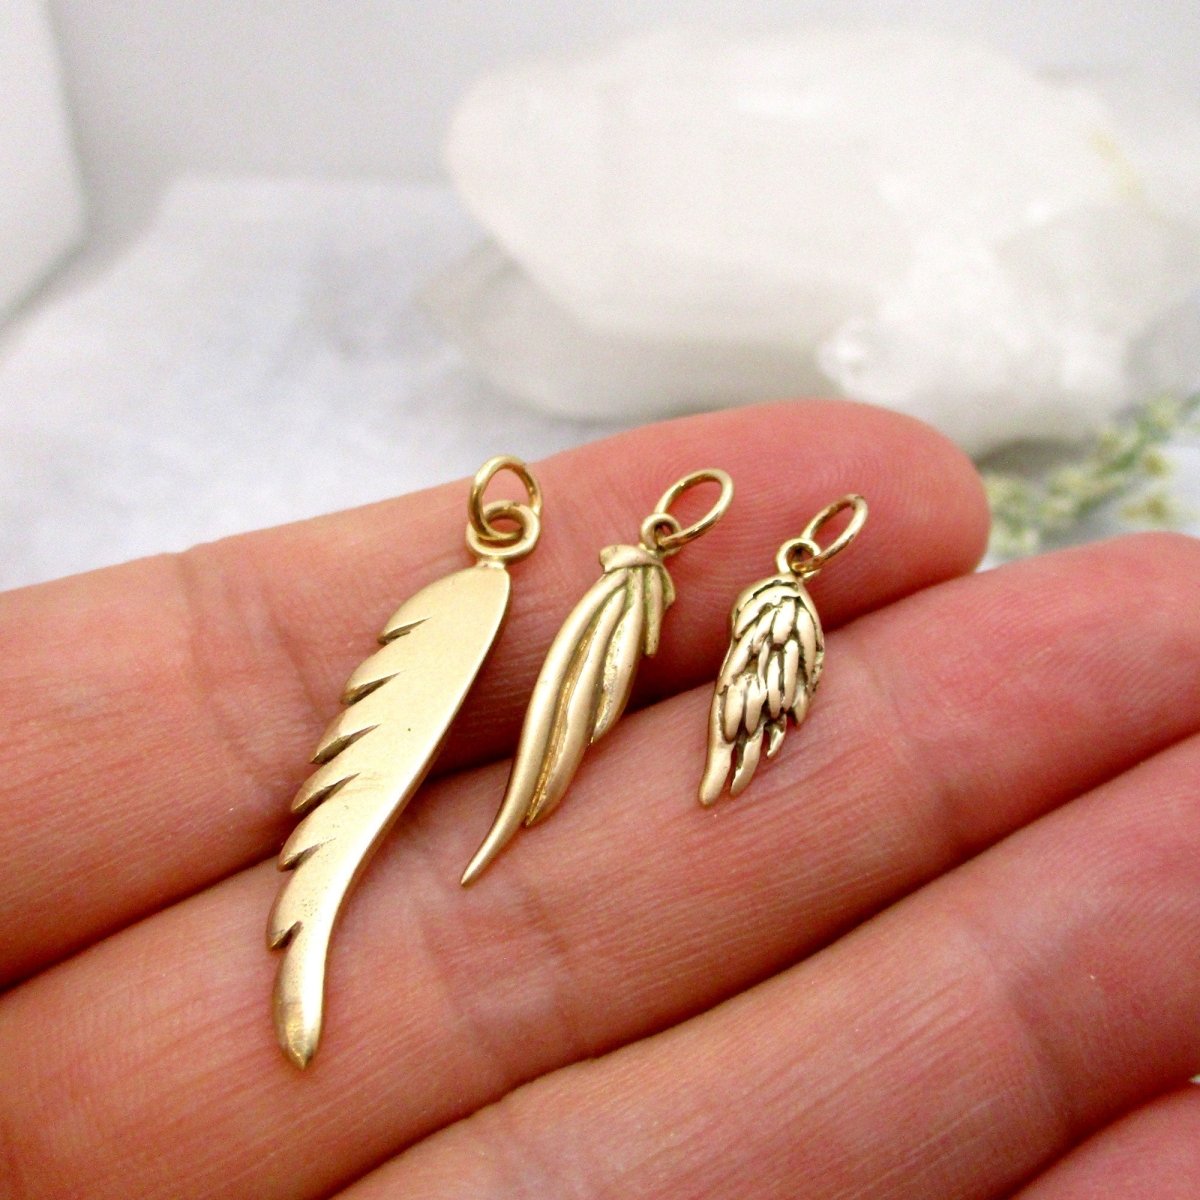 Feathered Angel Wing Earrings in Solid 14 Karat Yellow Gold, Guidance and Protection - Luxe Design Jewellery